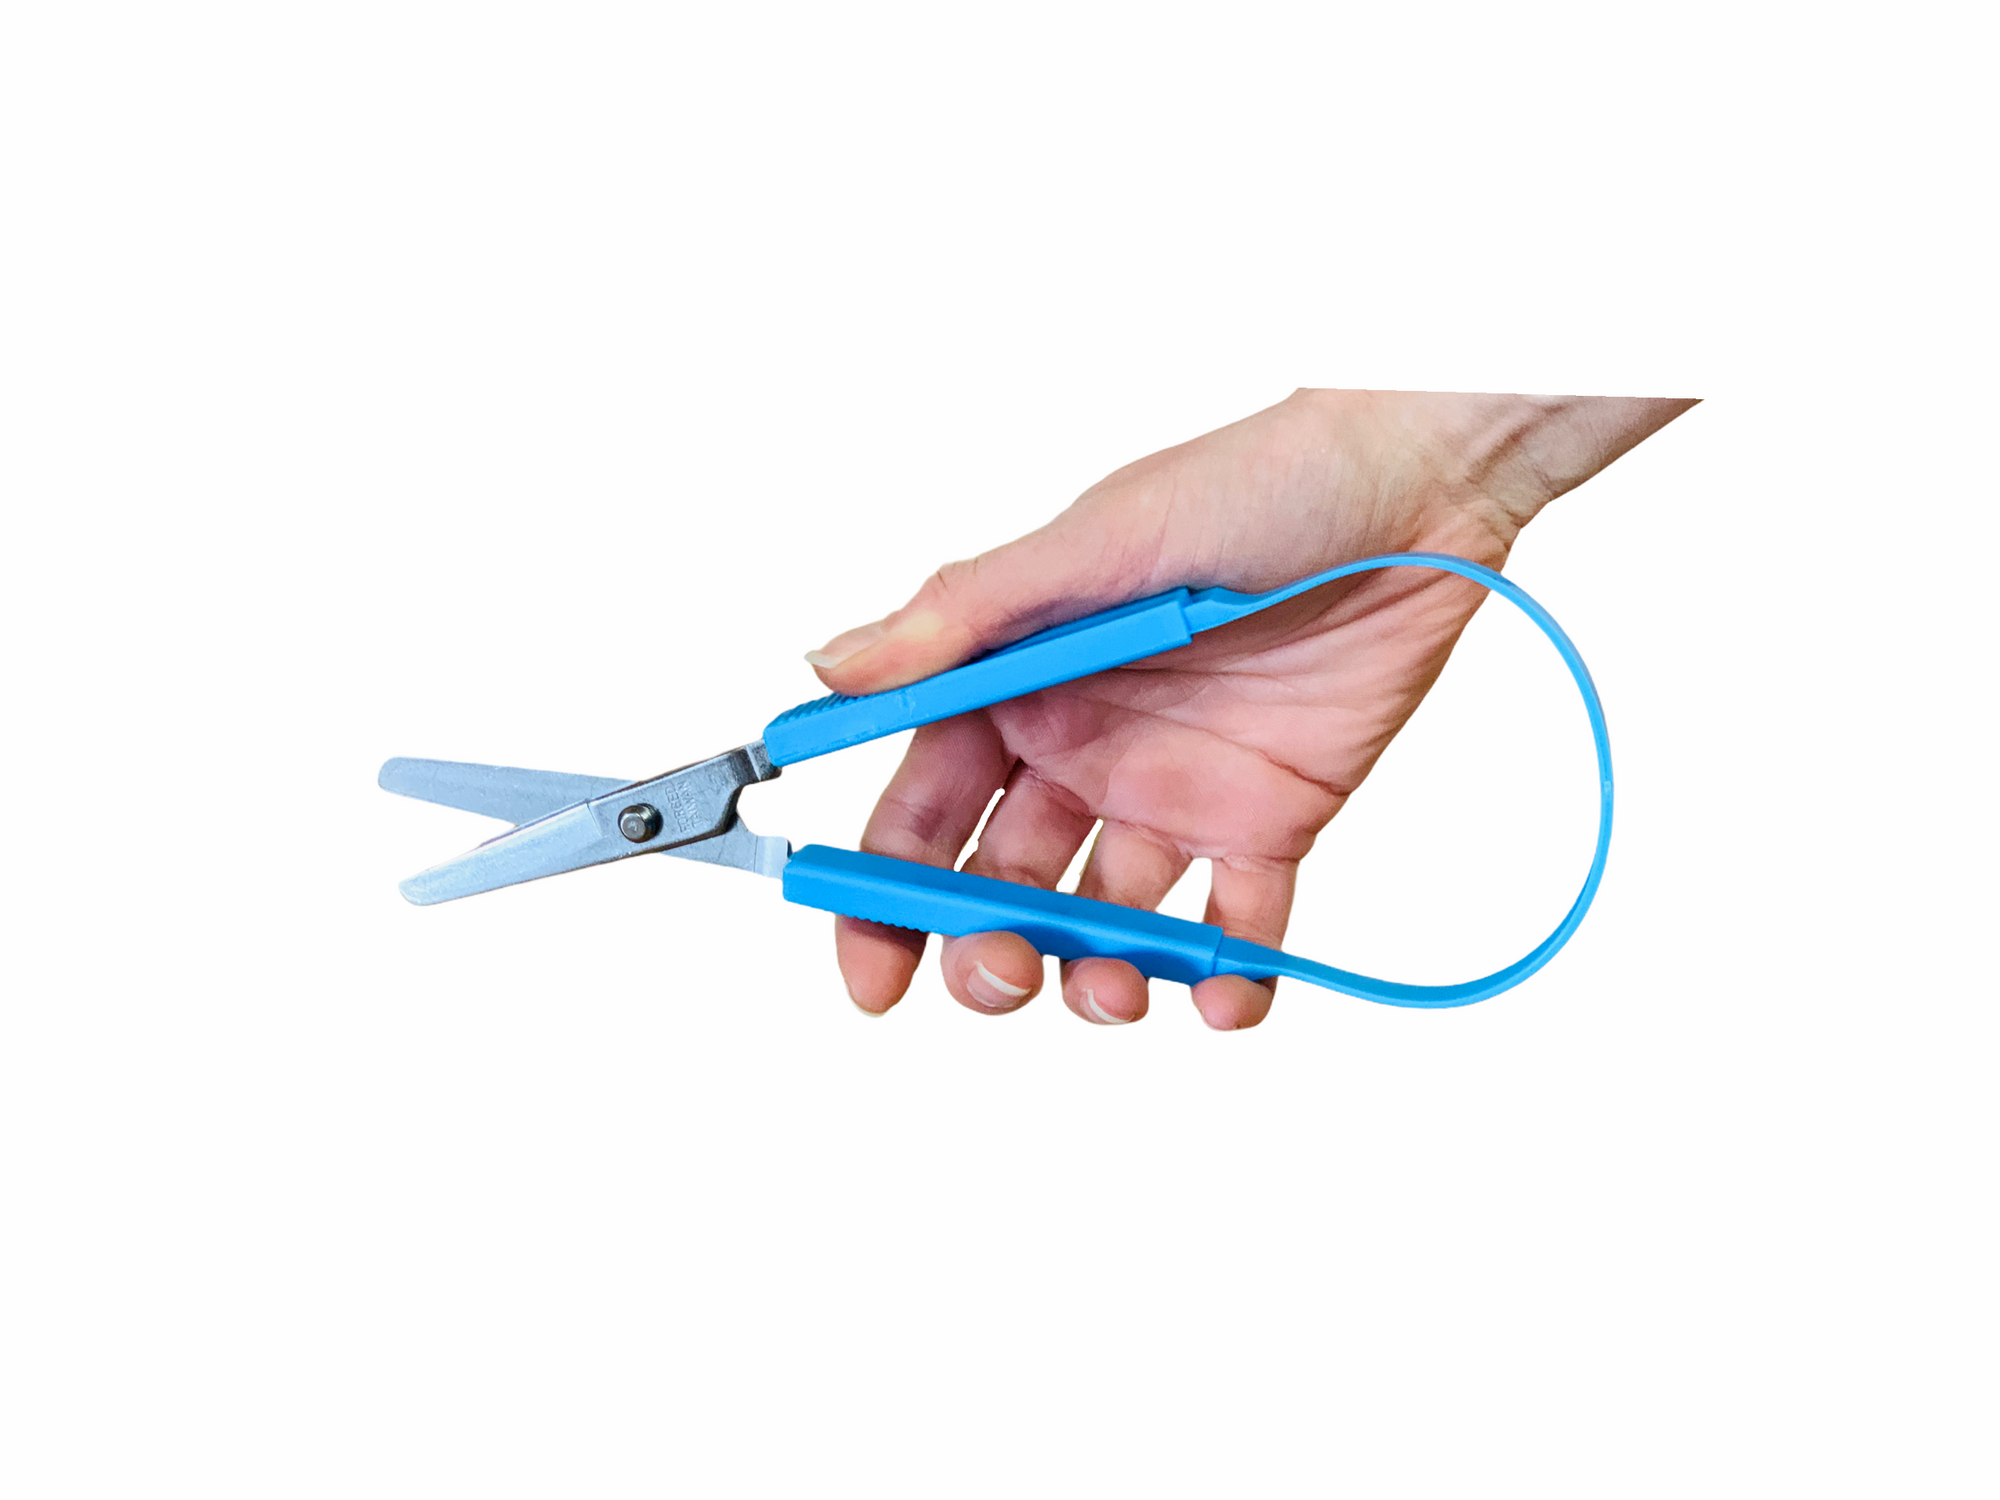 Blue Easy Hold Scissors with hand holding them on white background